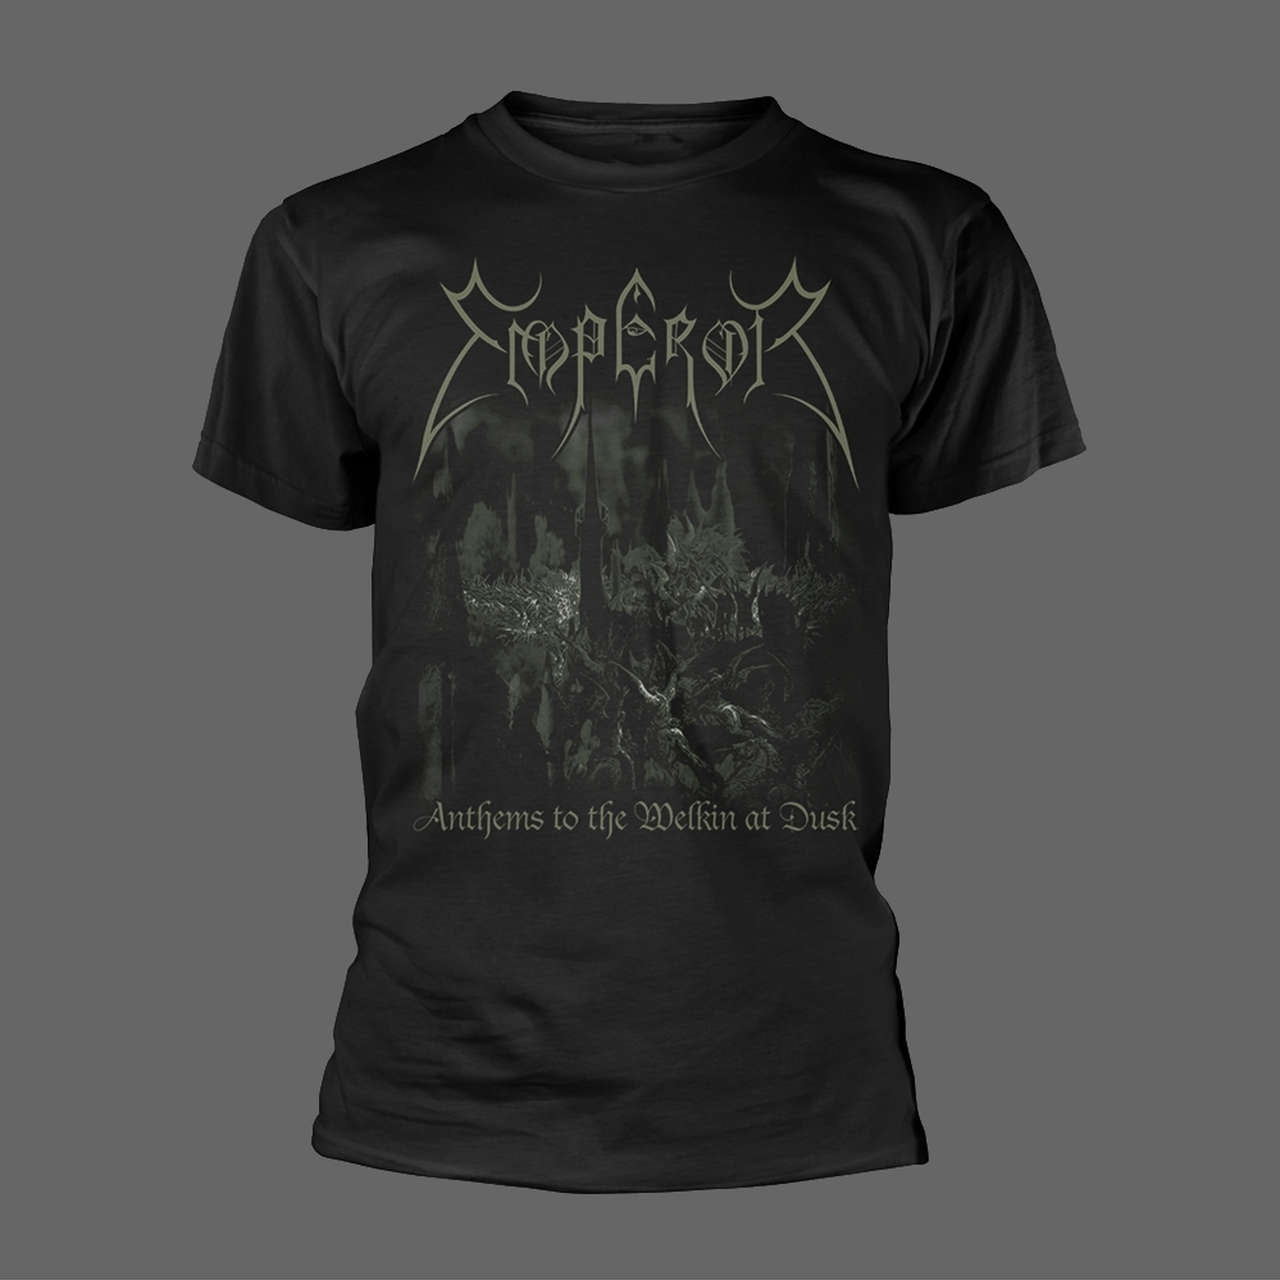 Emperor - Anthems to the Welkin at Dusk 1997-2017 (T-Shirt)